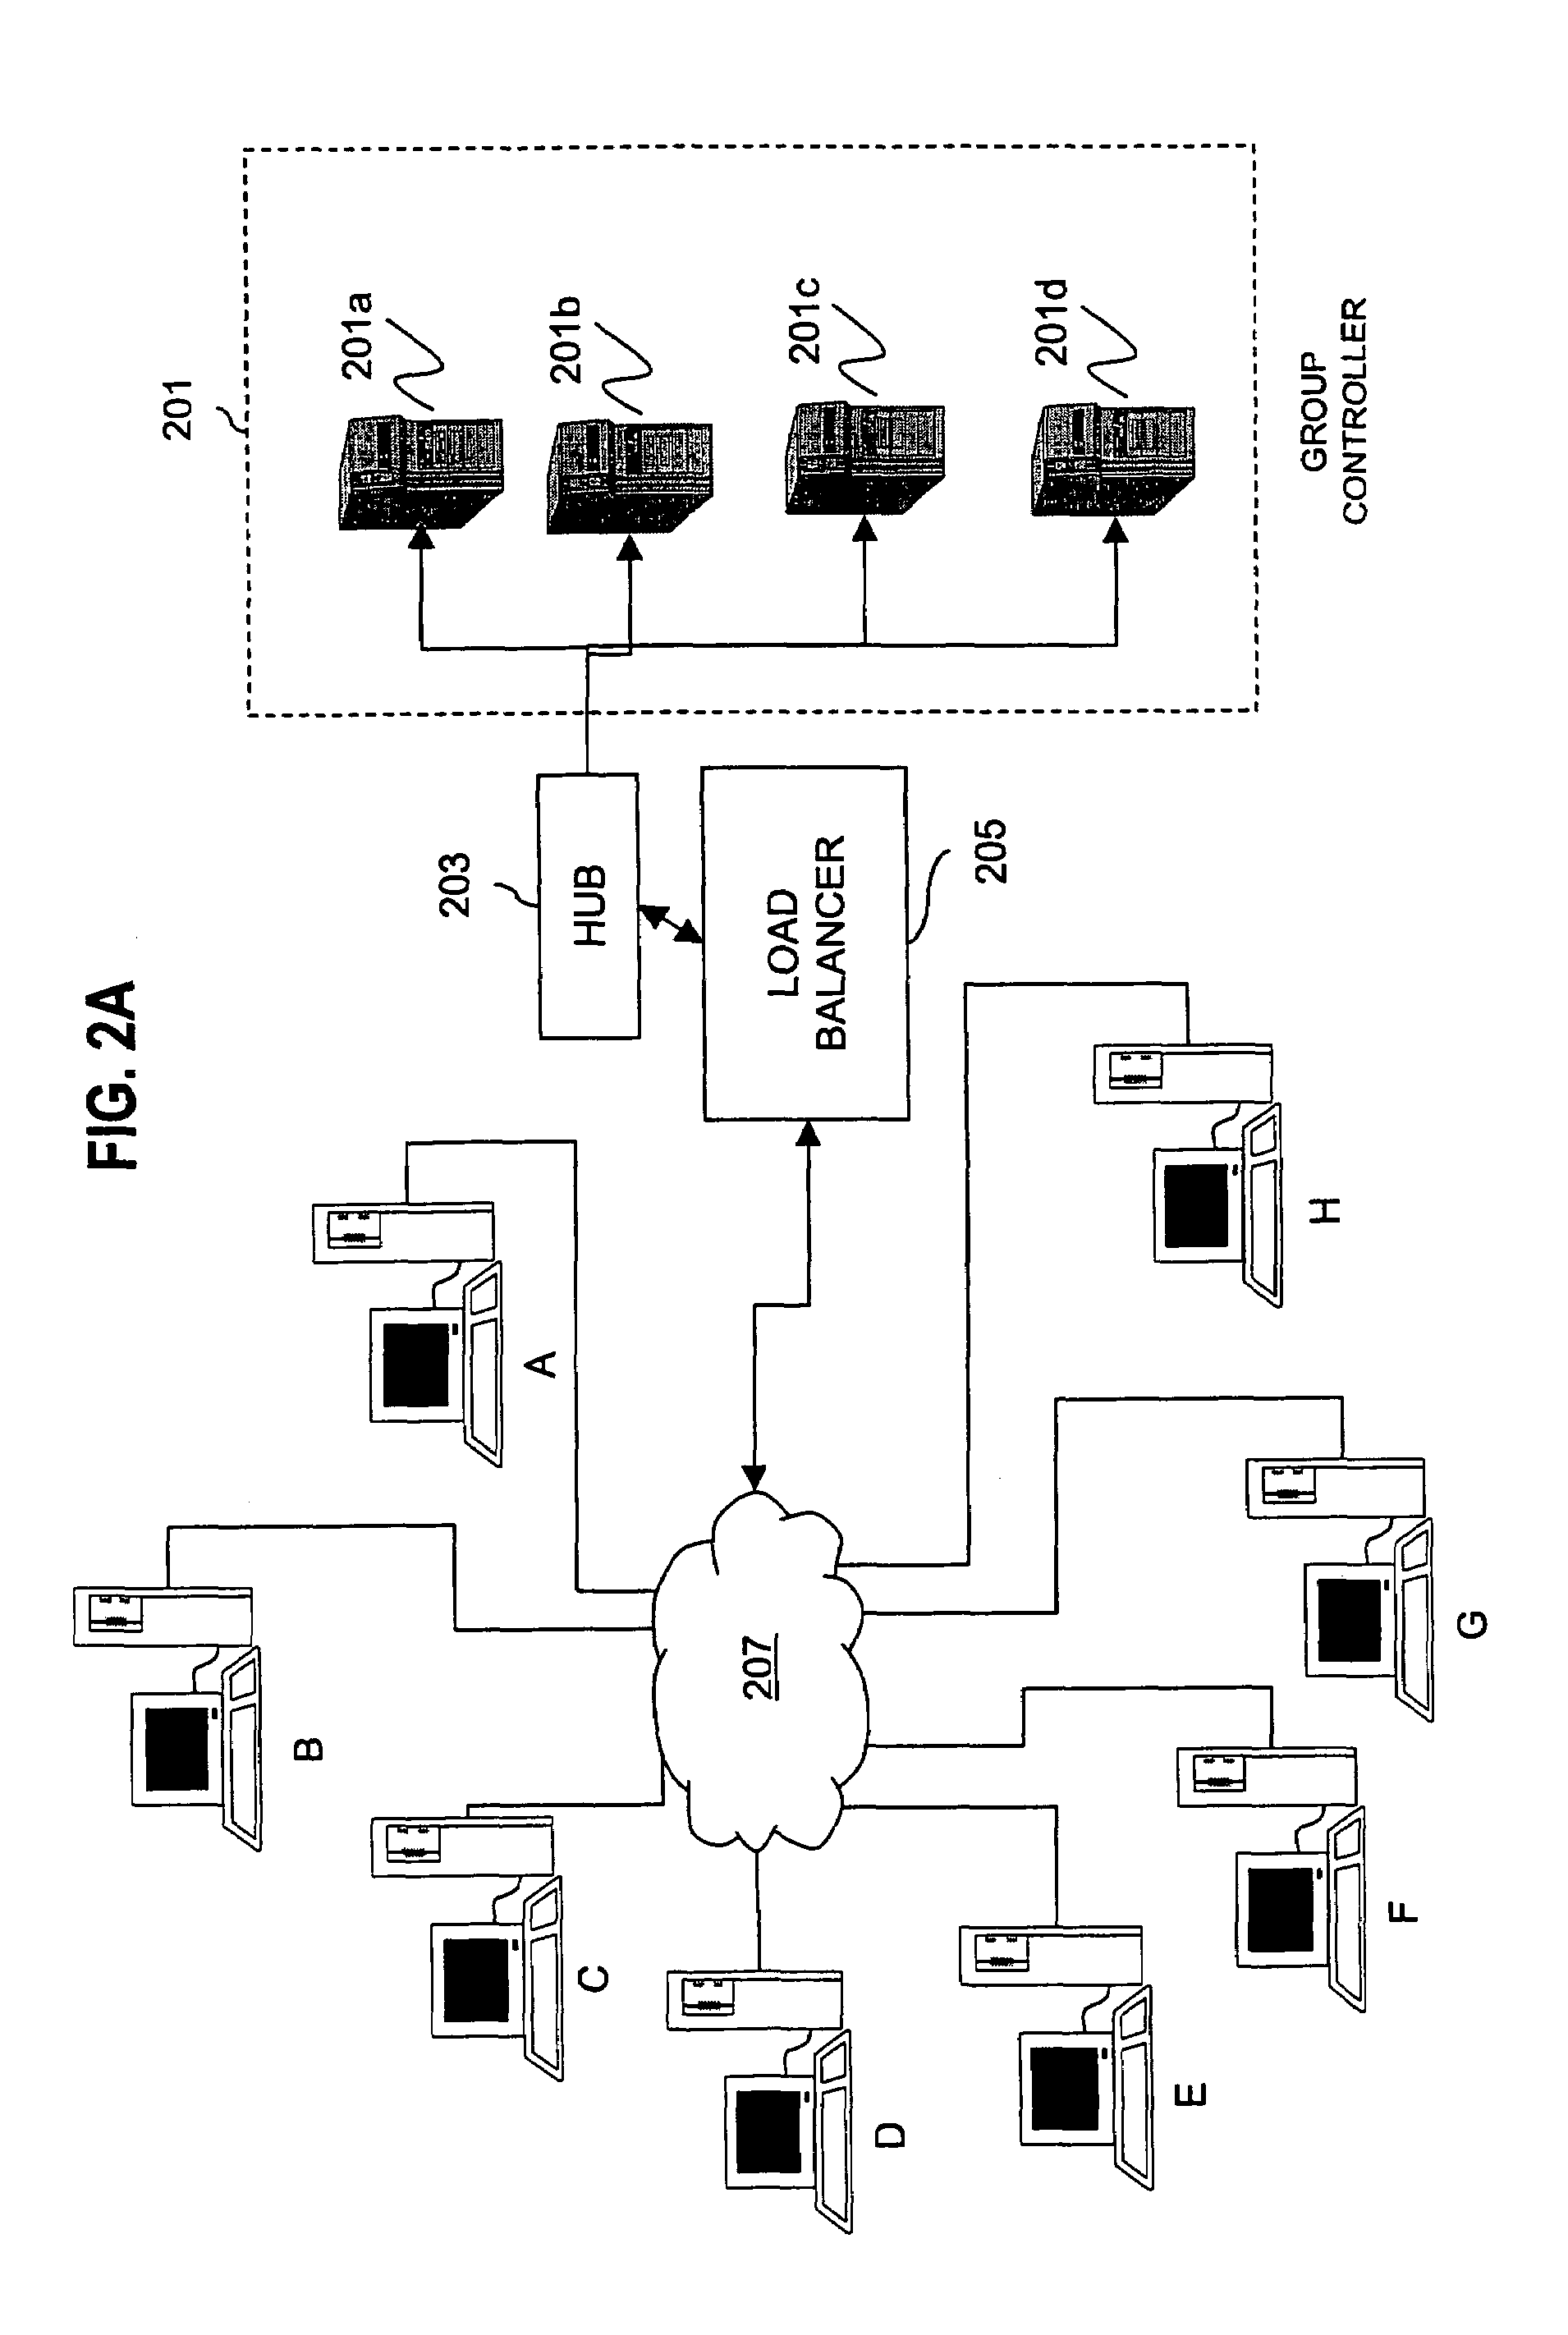 Method and apparatus for creating a secure communication channel among multiple event service nodes